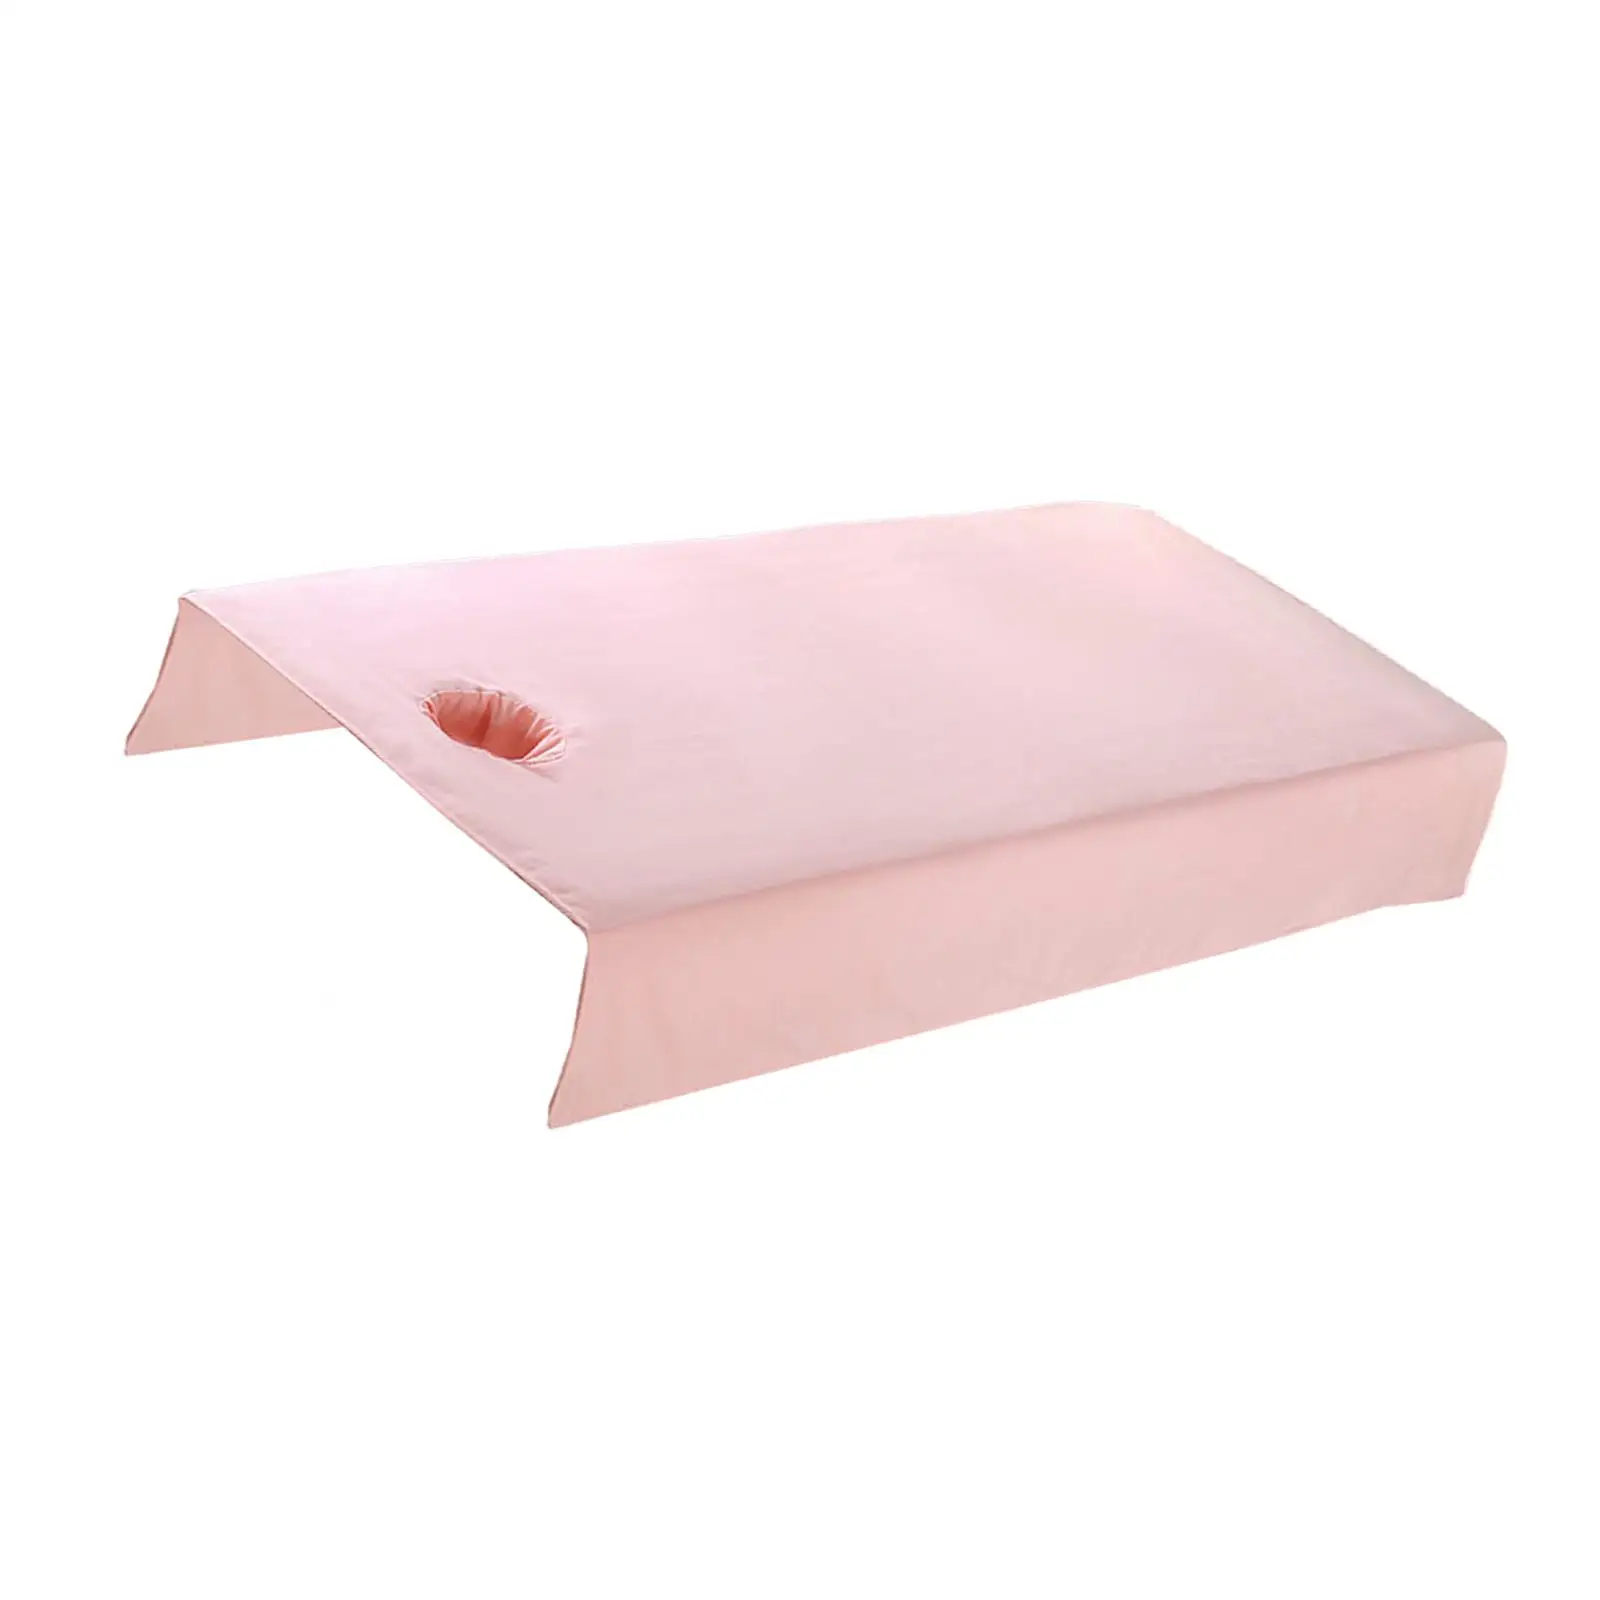 SPA Massage Bed Cover Sheet Protector with Hole 31.5x78.7inch Exquisite Workmanship Durable Anti Slip Accessories Polyester Wrap